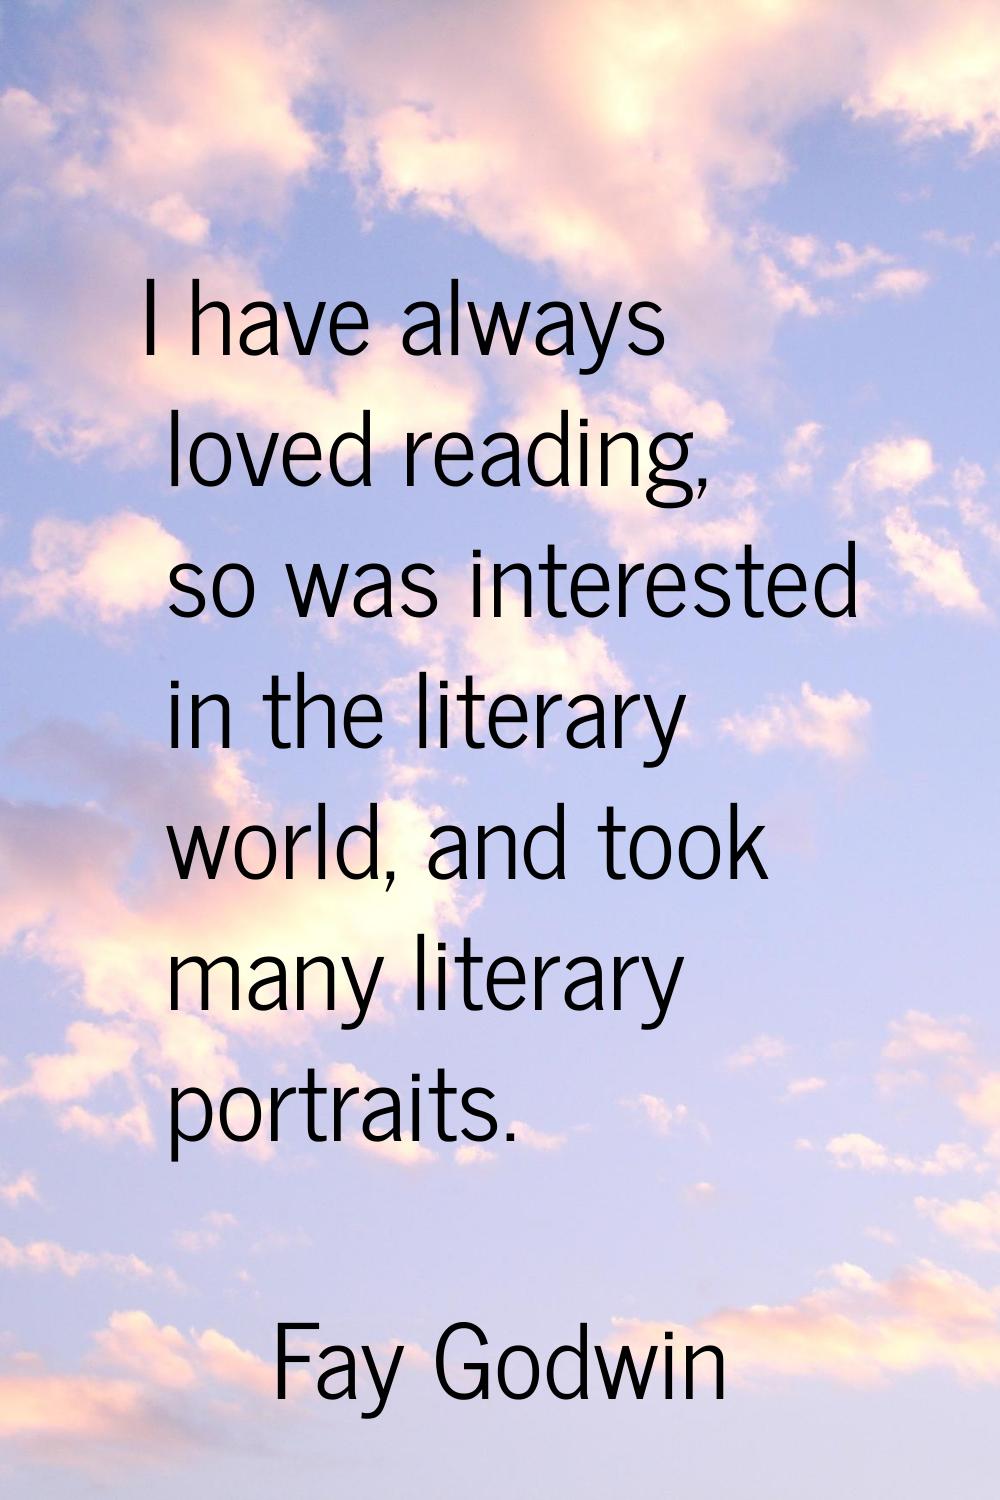 I have always loved reading, so was interested in the literary world, and took many literary portra